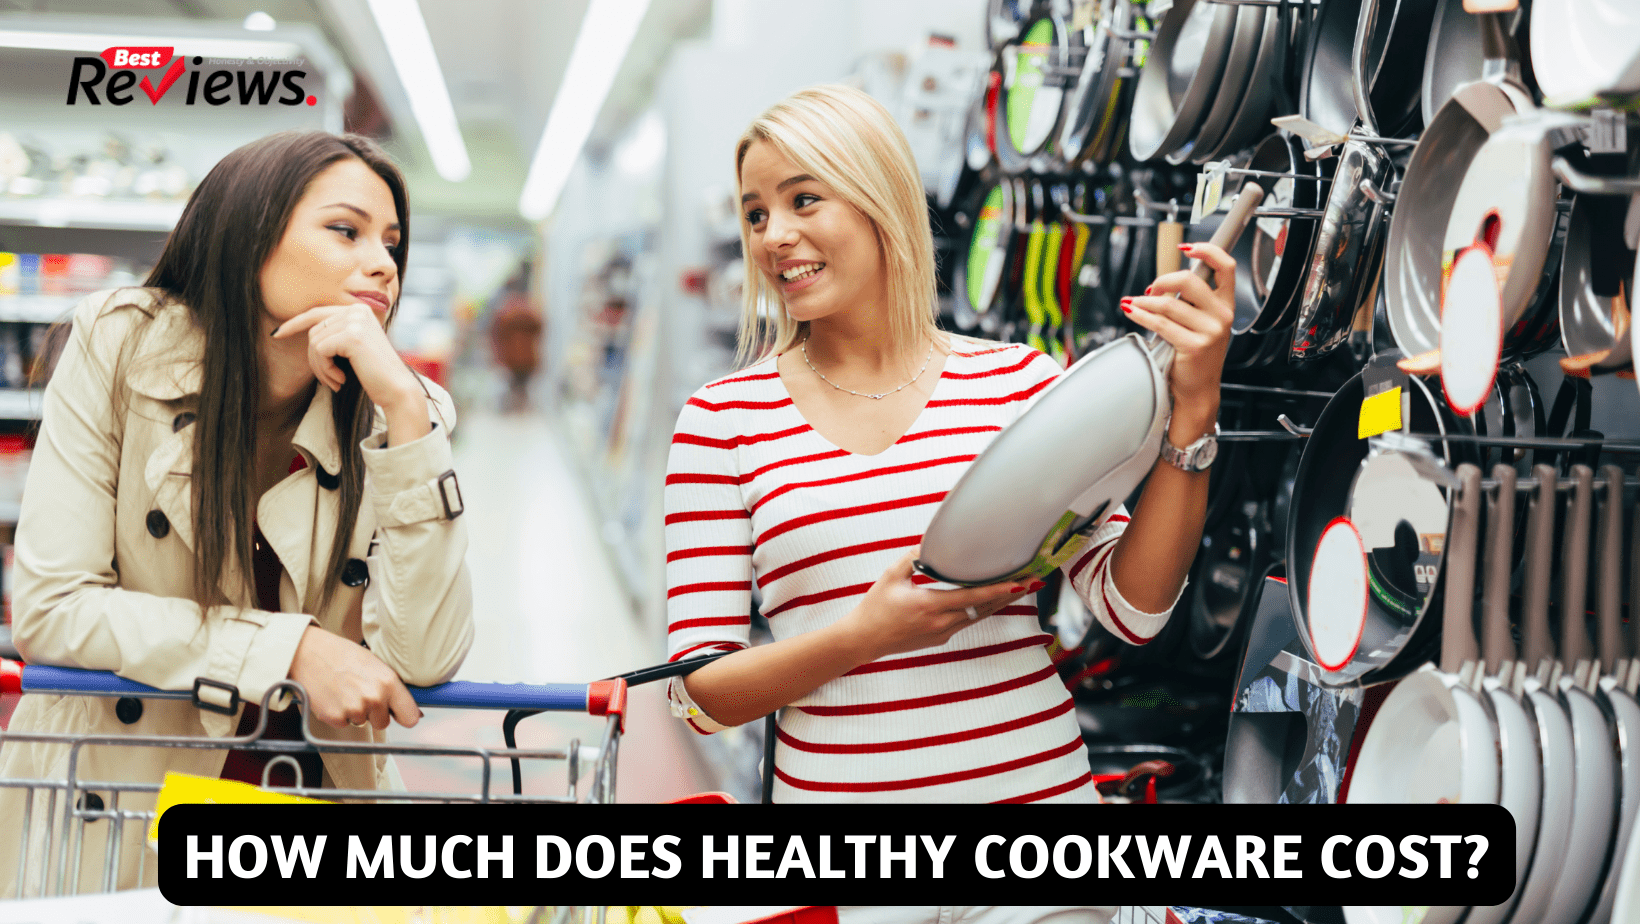 HOW MUCH DOES HEALTHY COOKWARE COST